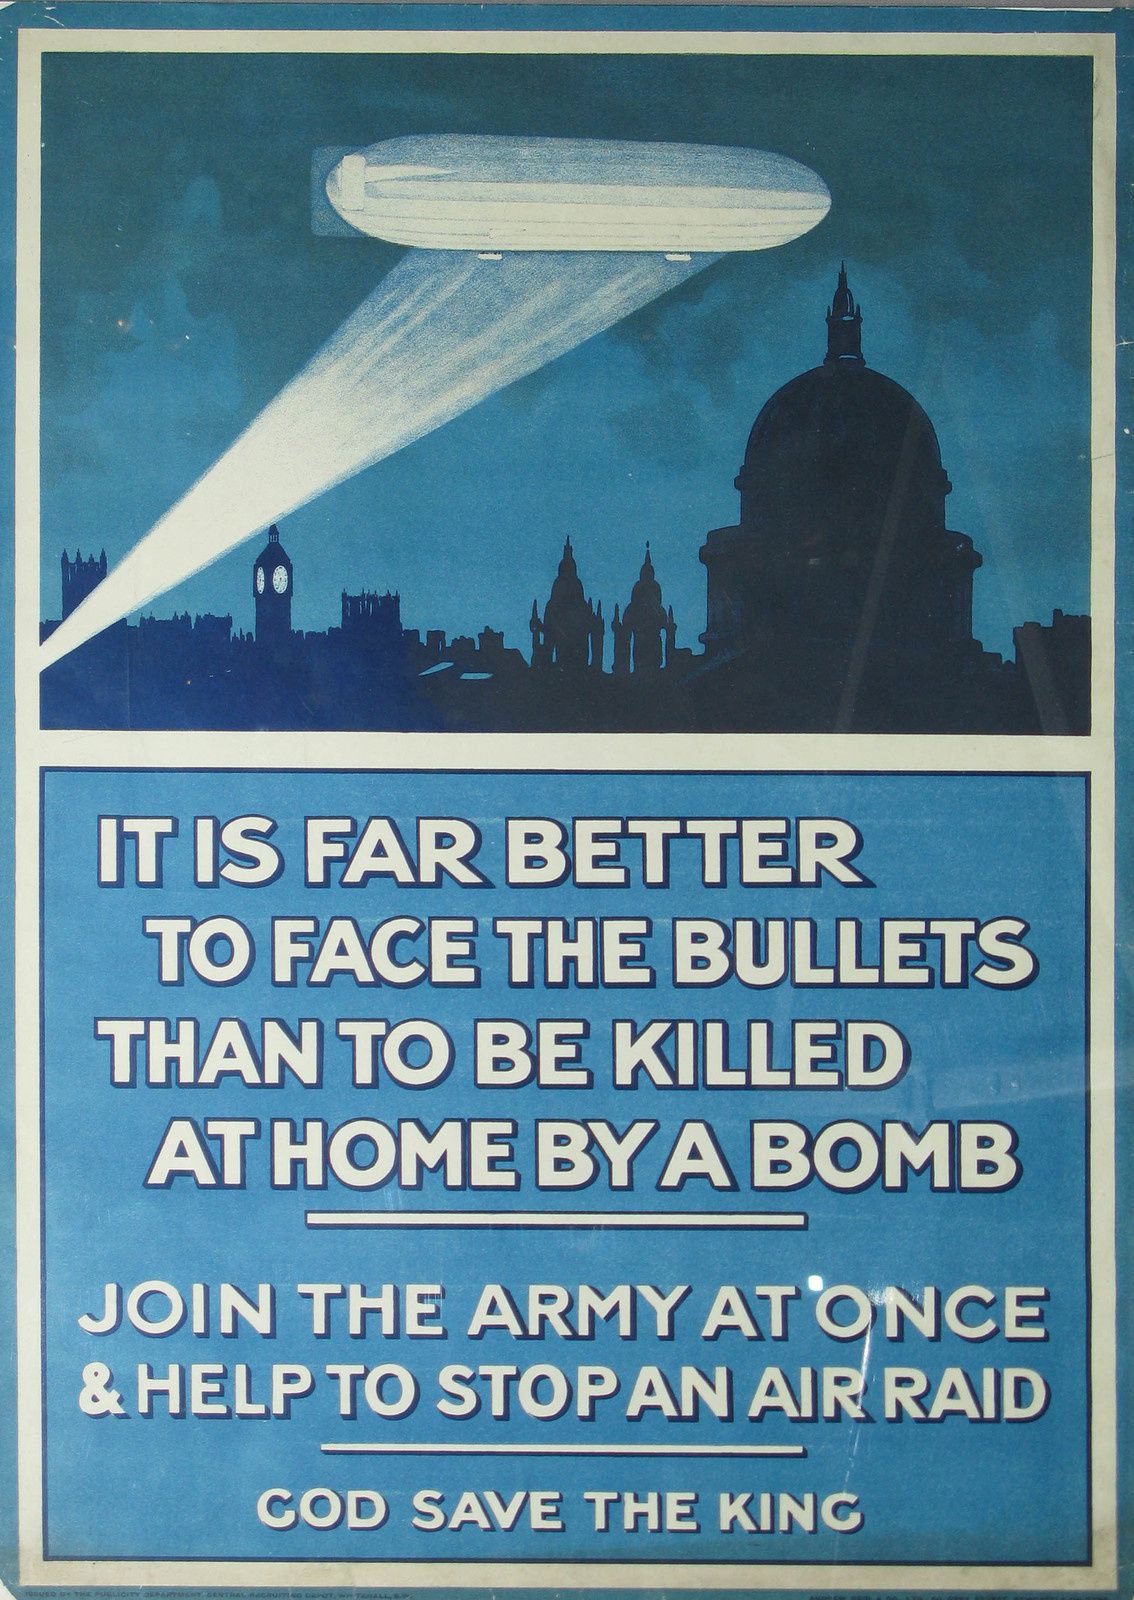 WWI poster profiting on the scare brought about by the German night bombing raids on London. Photo taken in the Imperial War Museum in London.